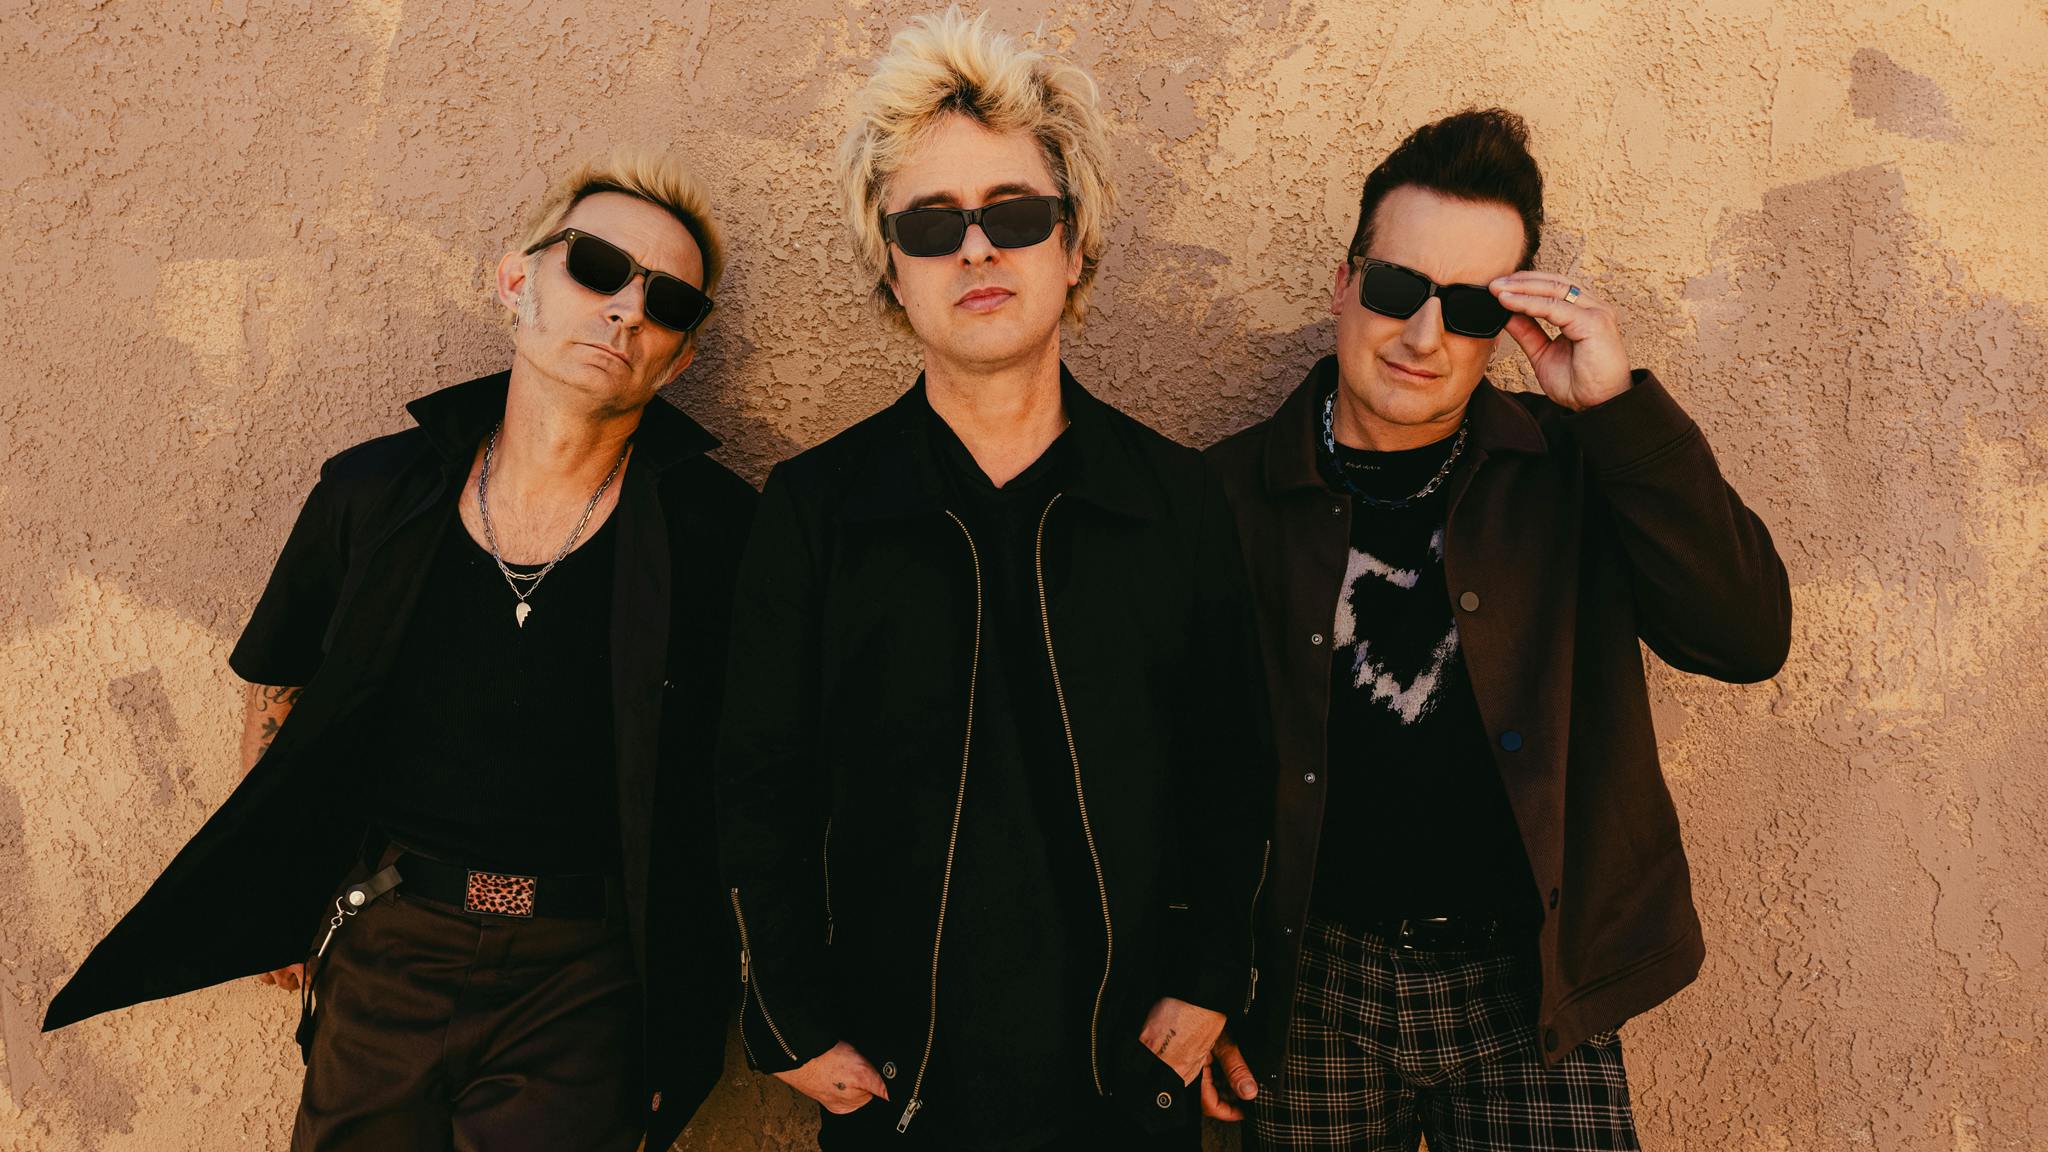 Green Day to release new single Dilemma this Thursday